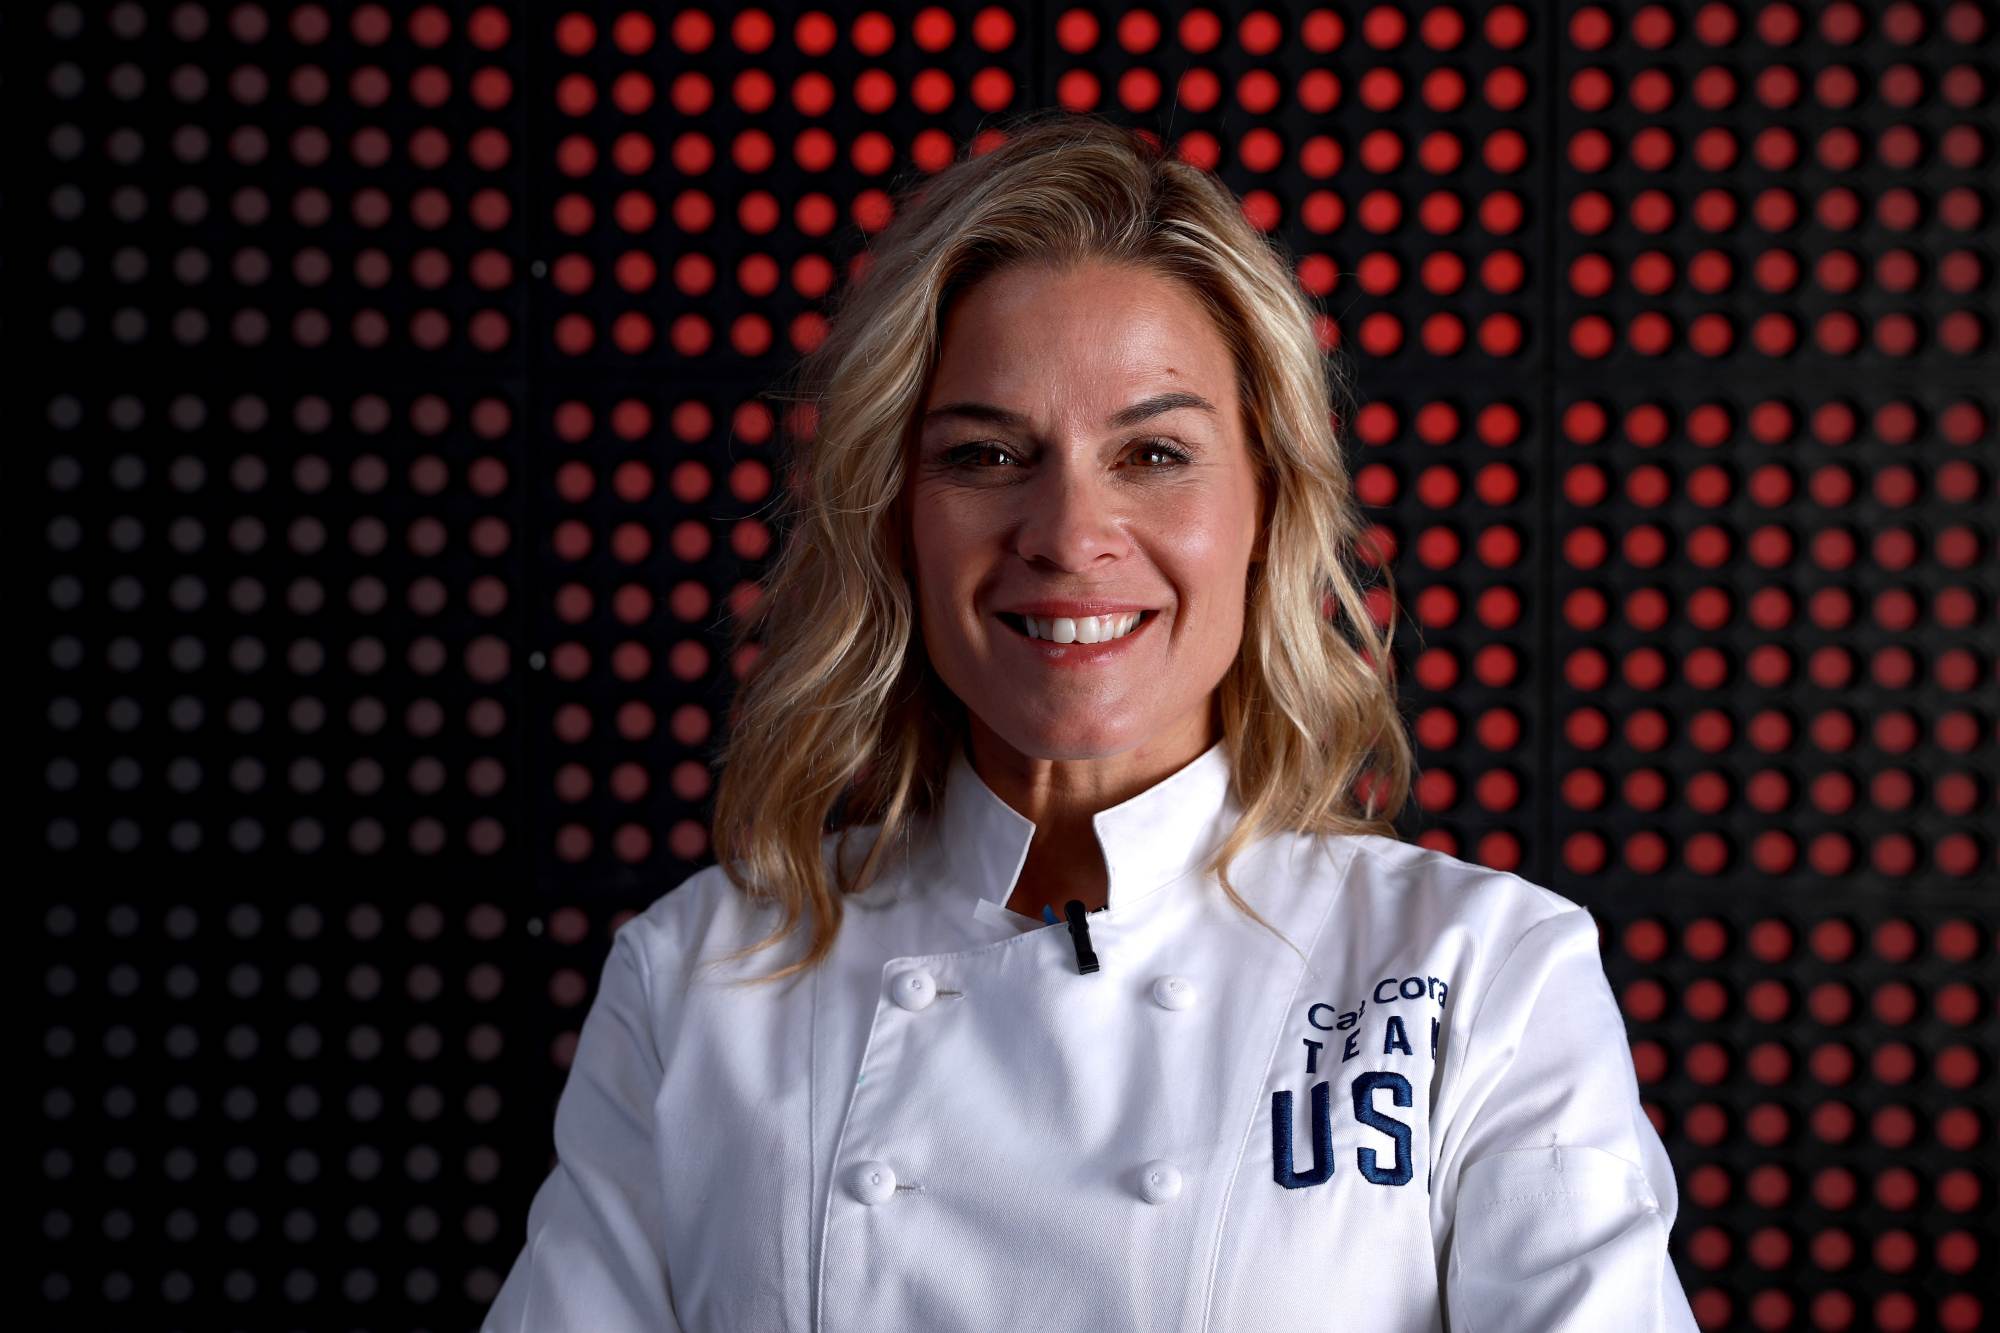 Cat Cora wearing a chef's jacket, smiling in a portrait.